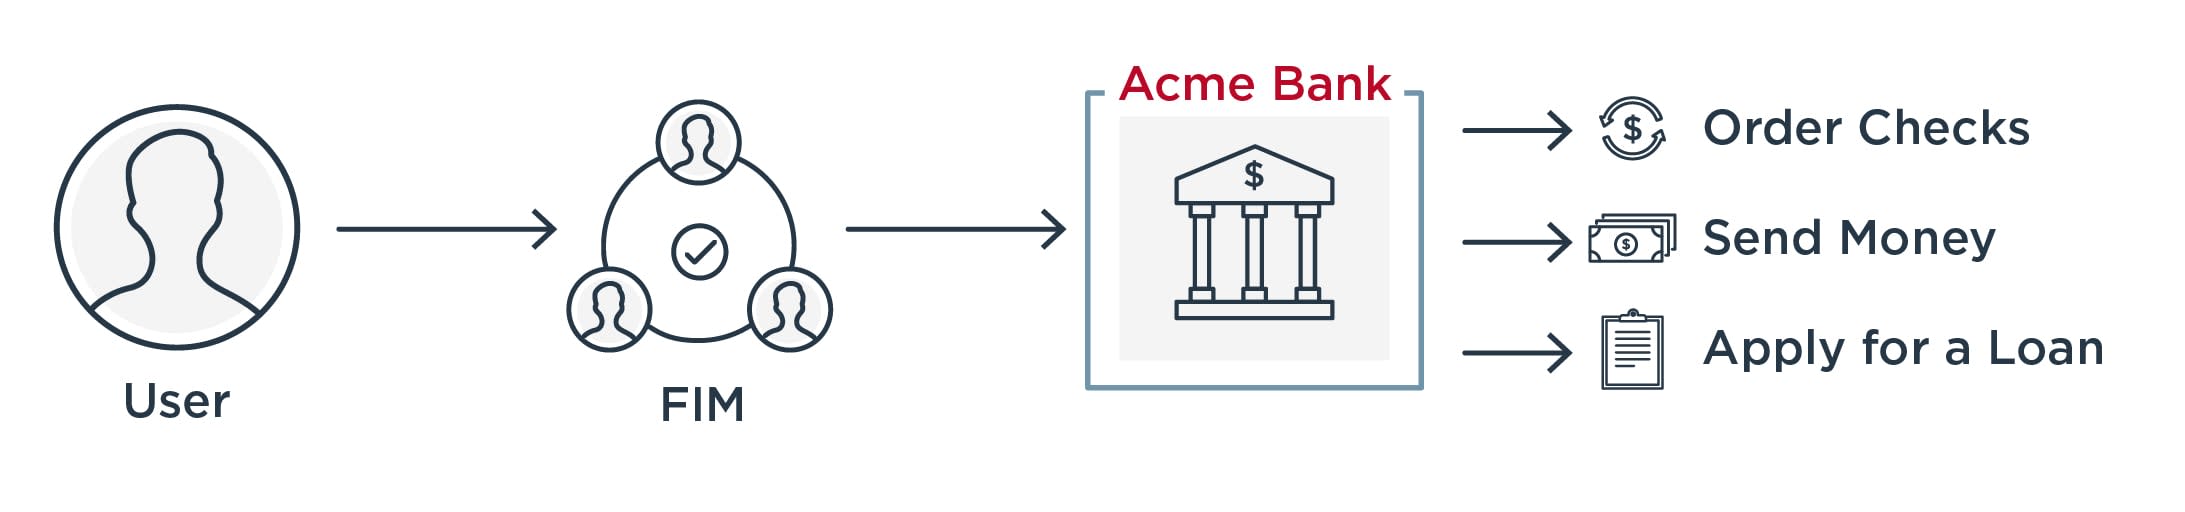 Diagram of single sign-on process being implemented at Acme Bank